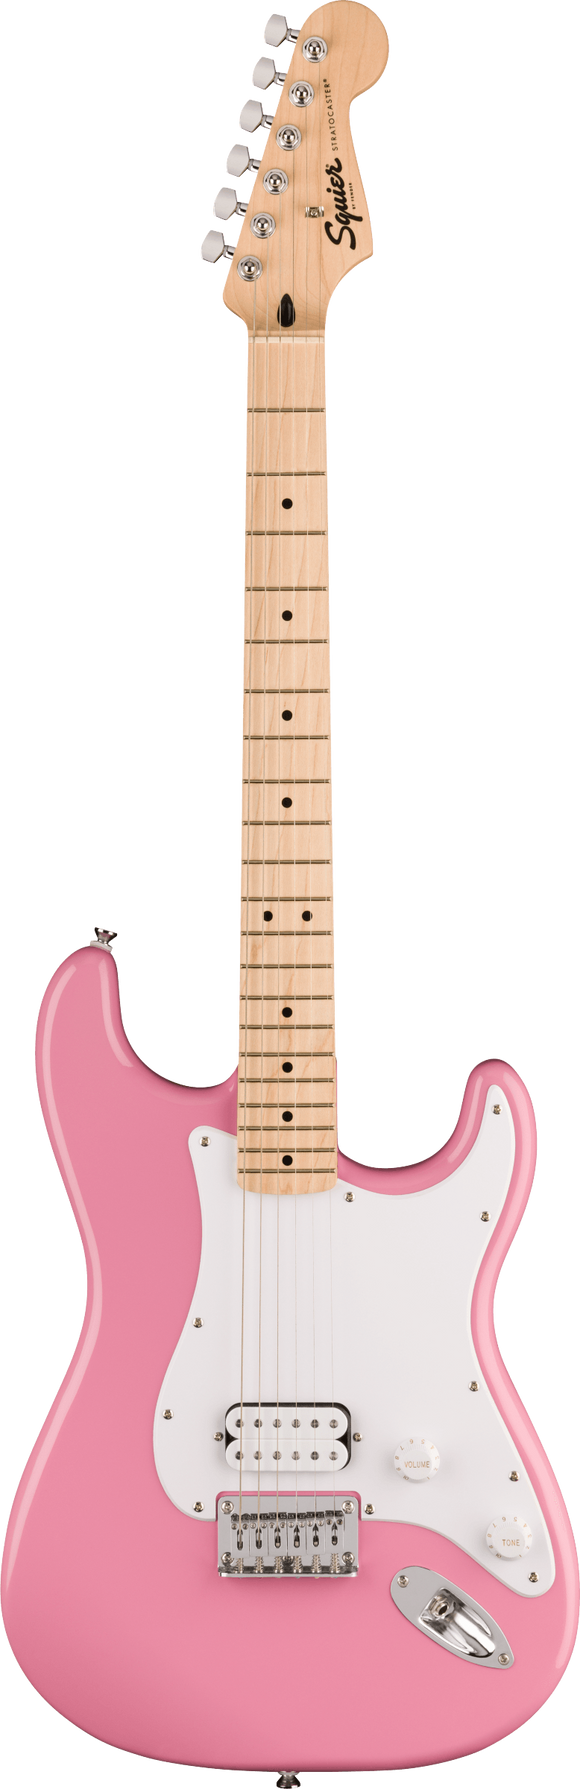 Squier Sonic Stratocaster, Pink